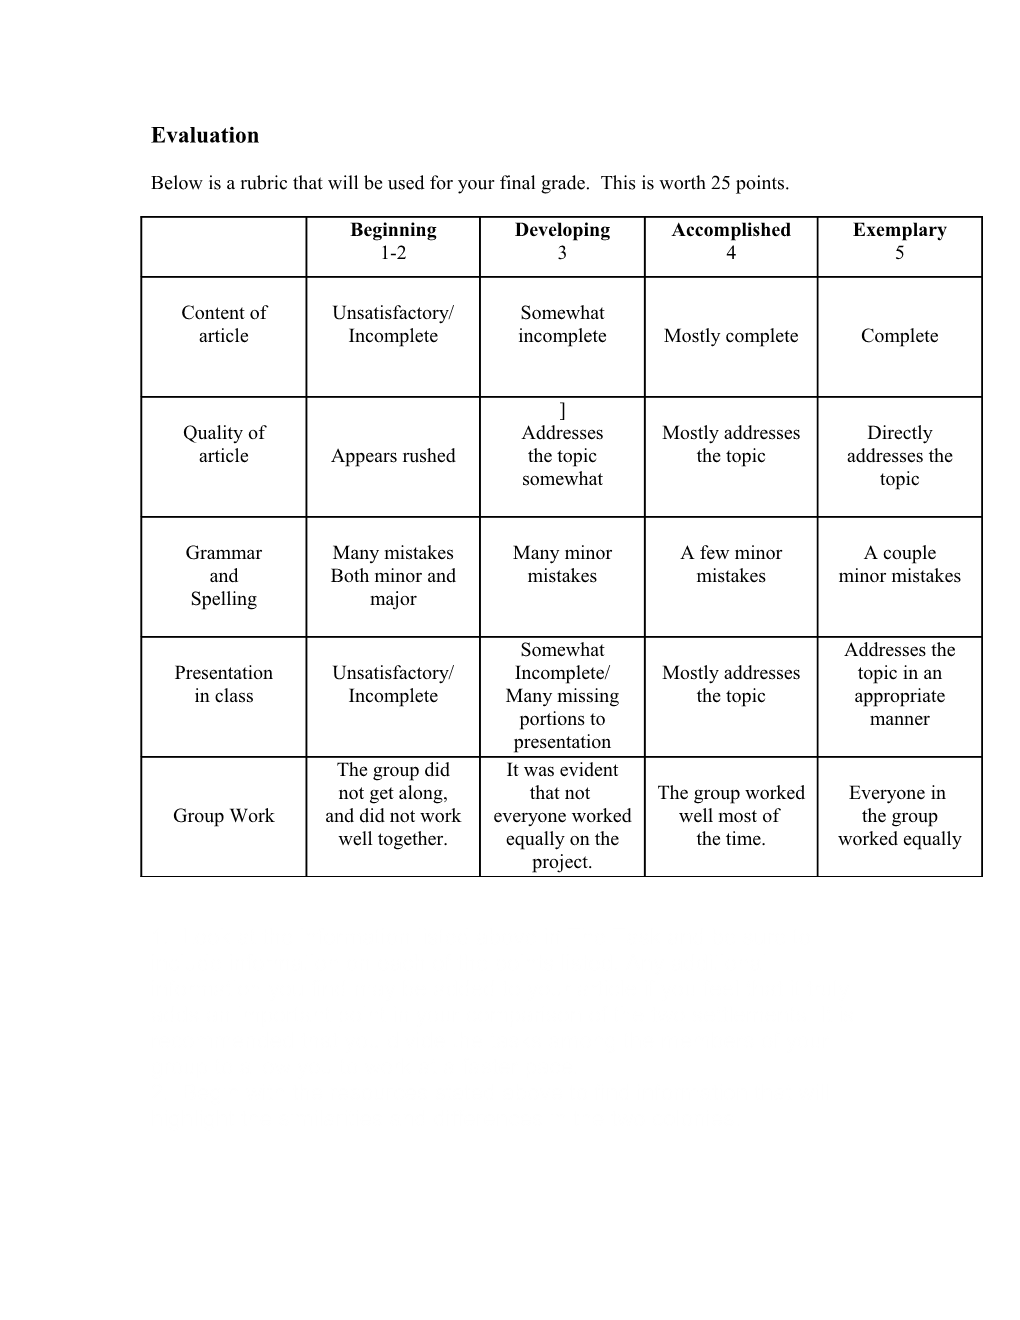 Below Is a Rubric That Will Be Used for Your Final Grade. This Is Worth 25 Points